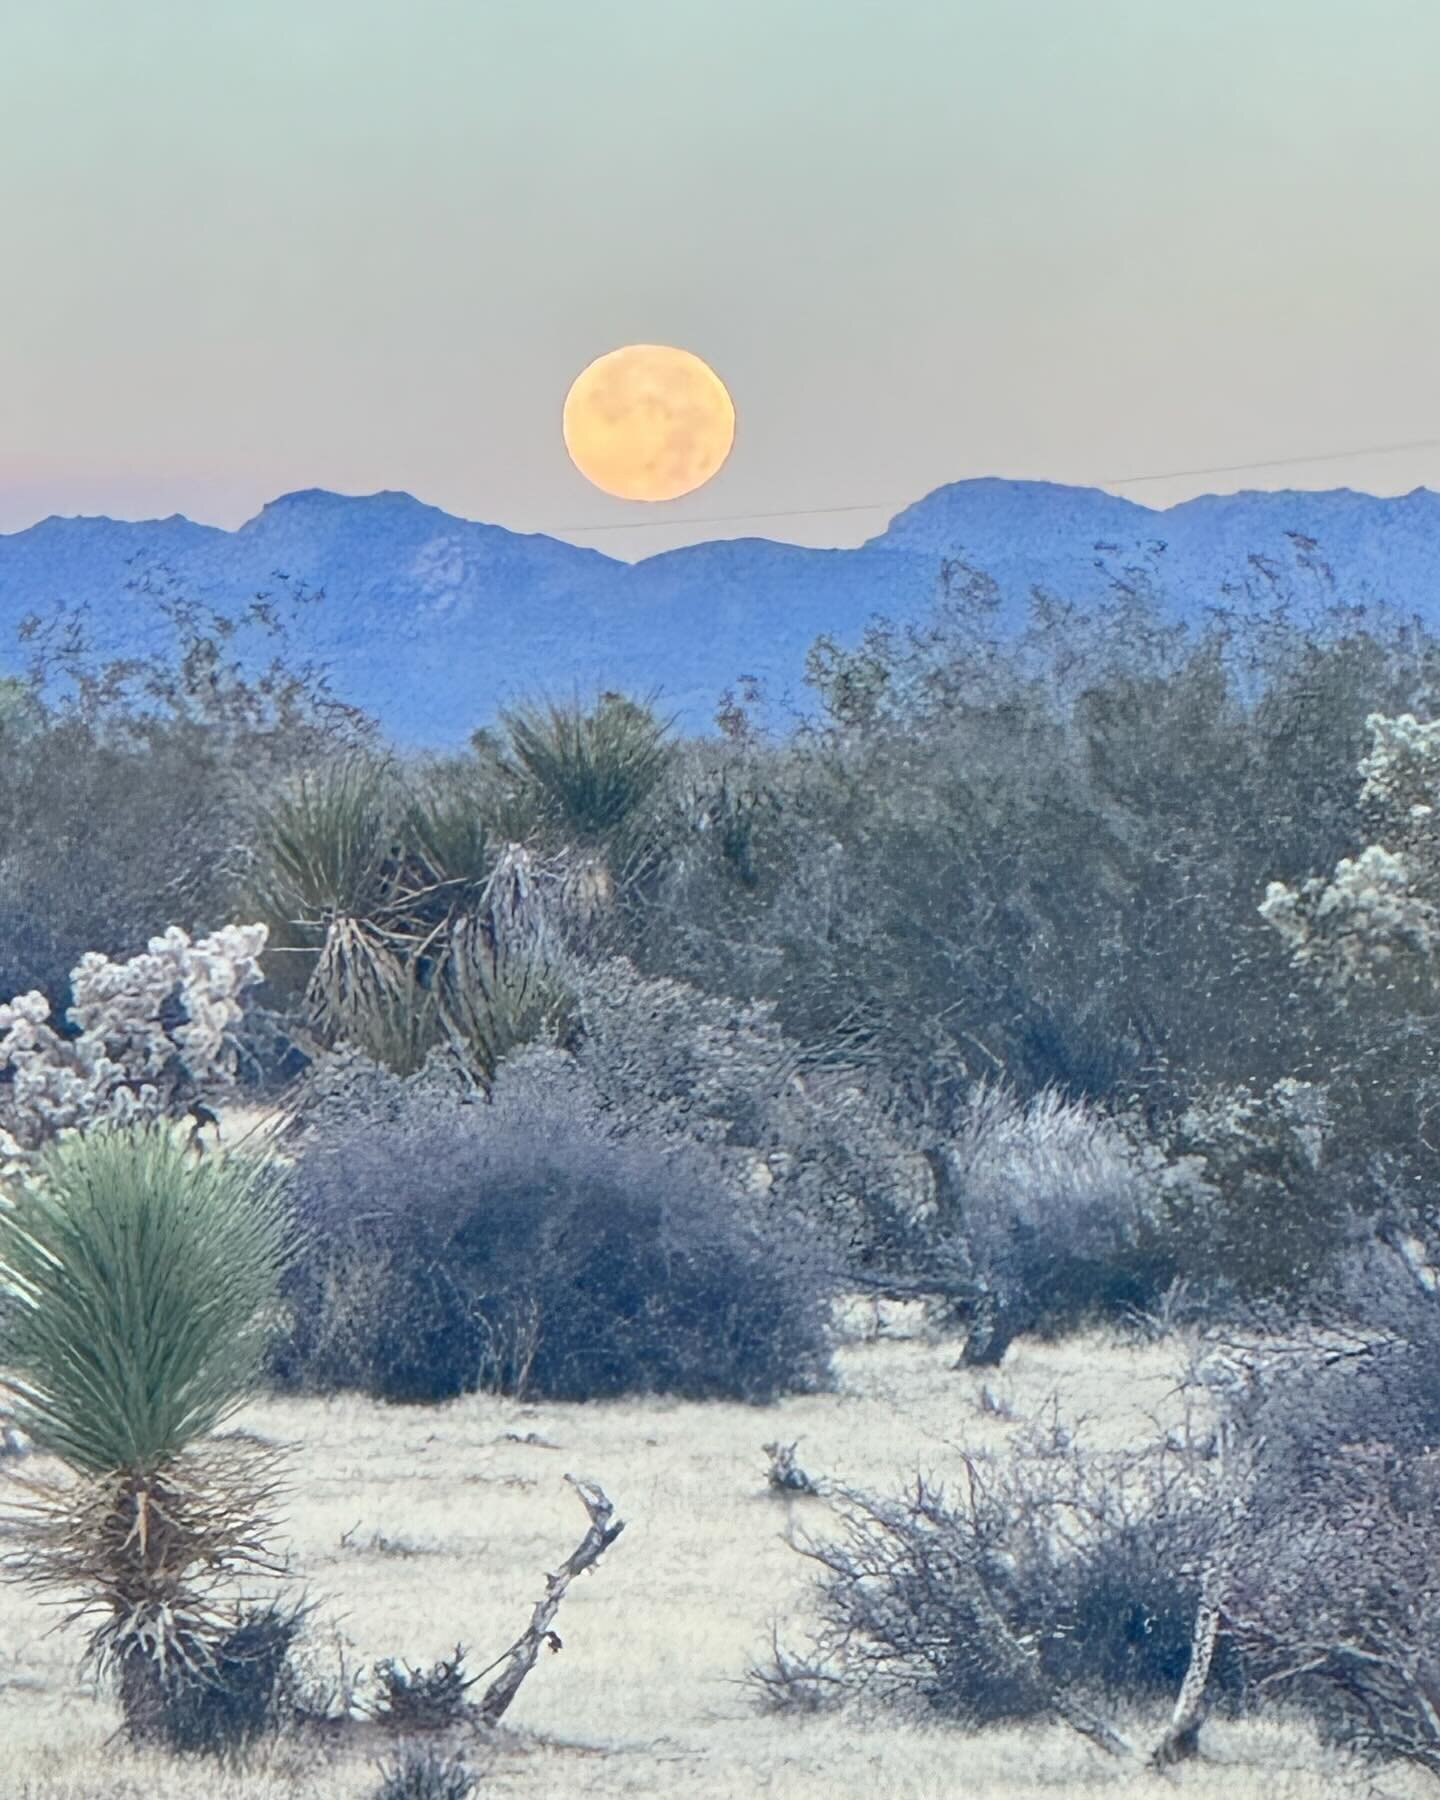 Full Moon in Gemini setting in the morning light of the Mojave 
So grateful for the magic of nature to balance the madness of our world. 
Blessings ✨✨🌕✨✨
#fullmoongemini #nofilter #blessingsandgratitude